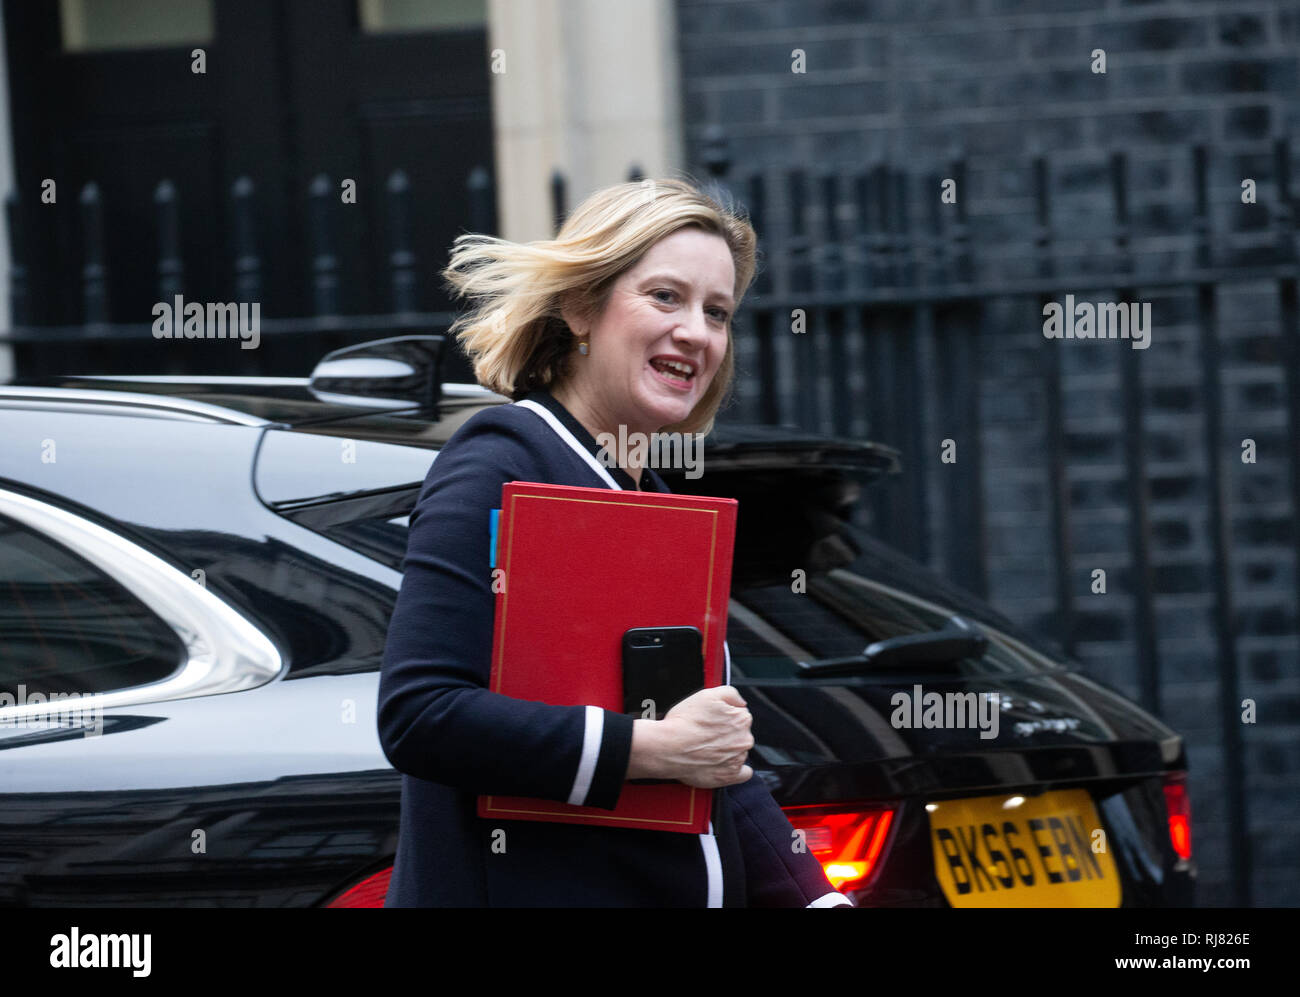 London, UK. 05th Feb, 2019. Amber Rudd, Secretary of State for Work and Pensions, arrives for the Cabinet Meeting. Credit: Tommy London/Alamy Live News Stock Photo